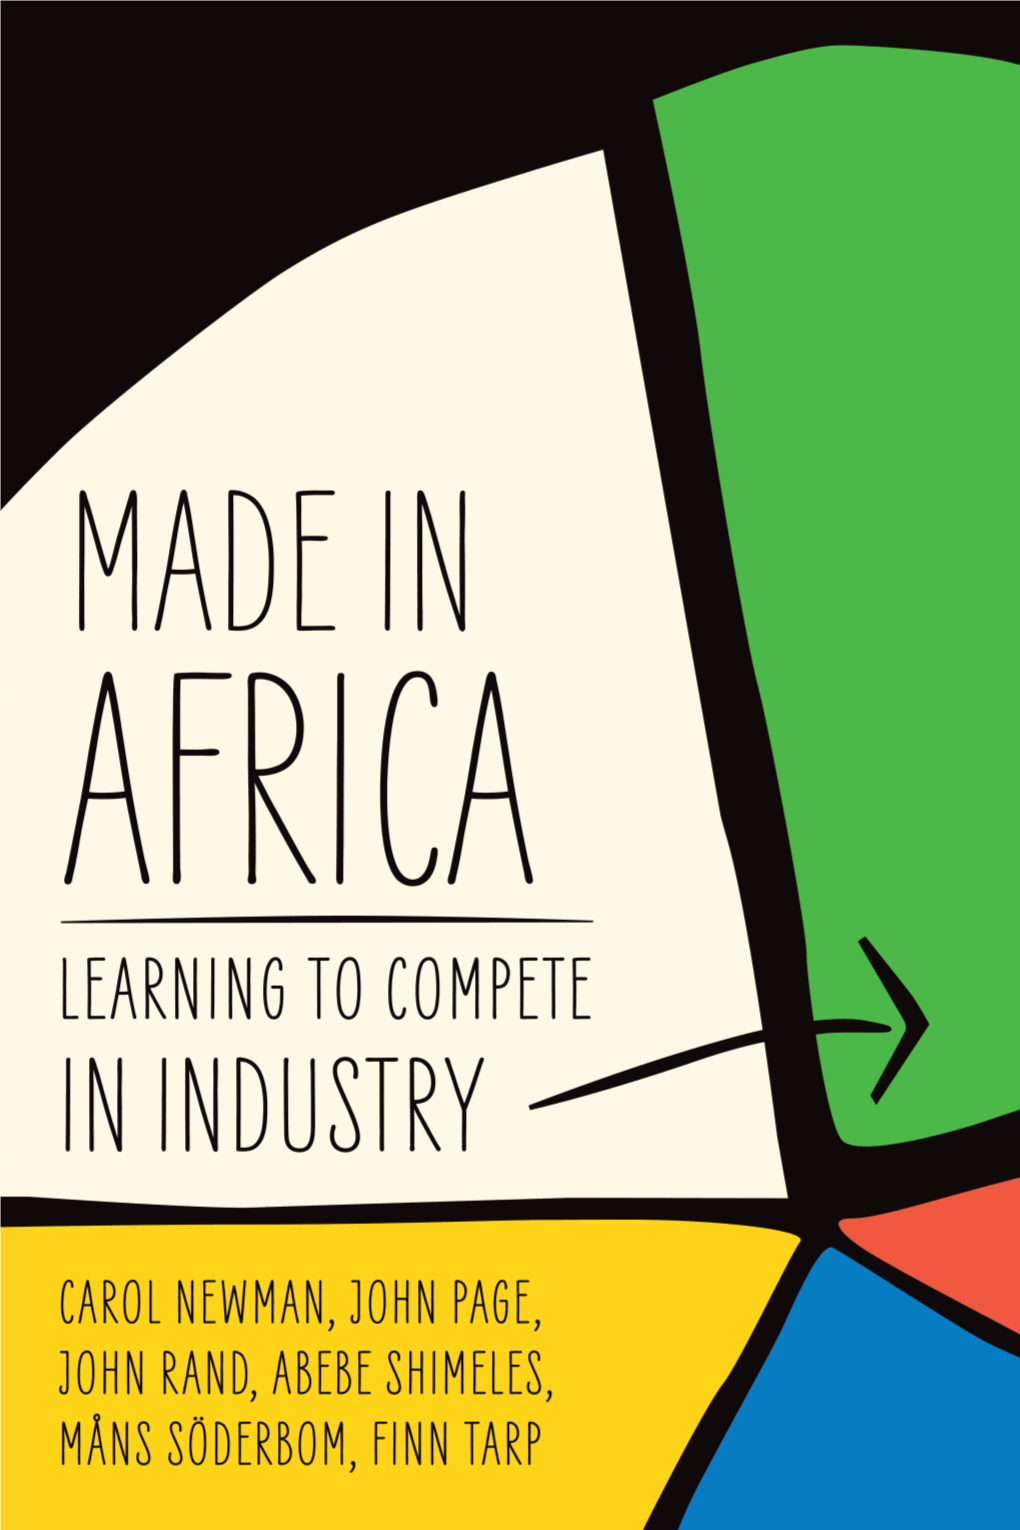 Made in Africa: Learning to Compete in Industry / Carol Newman, John Page, John Rand, Abebe Shimeles, Måns Söderbom, Finn Tarp